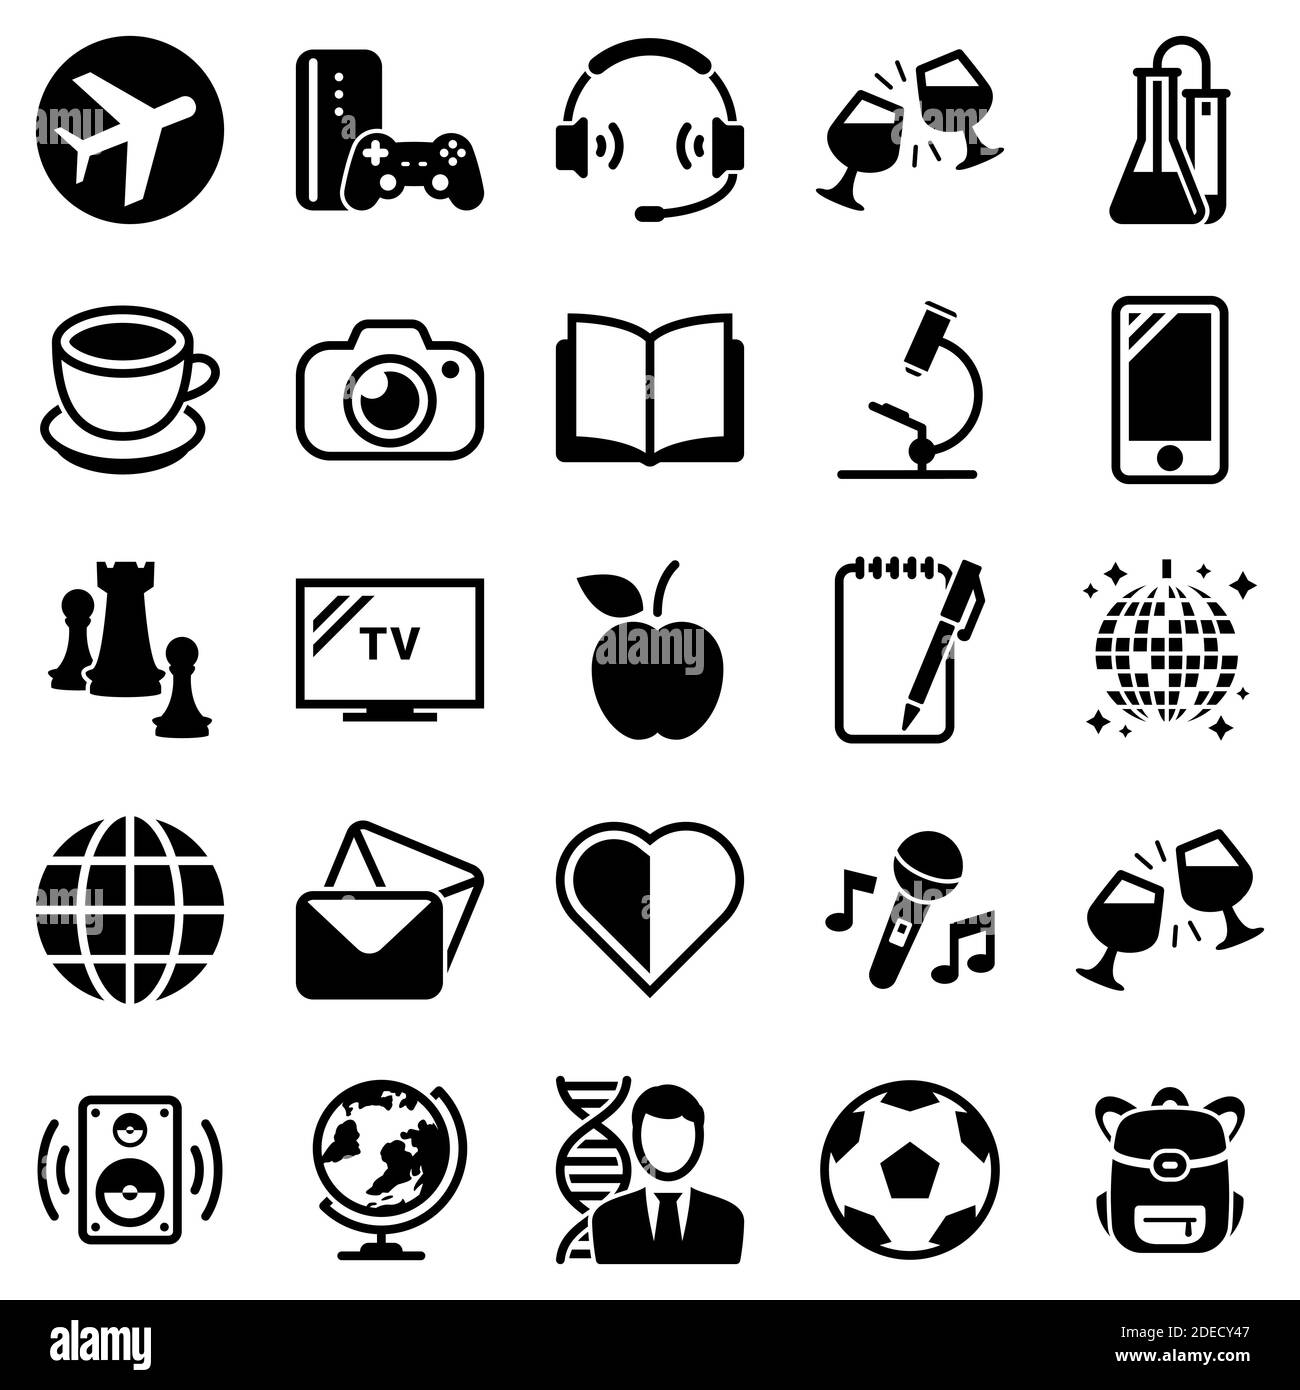 Set of simple icons on a theme Hobbies, entertainment, vector, design, collection, flat, sign, symbol,element, object, illustration. Black icons isola Stock Vector